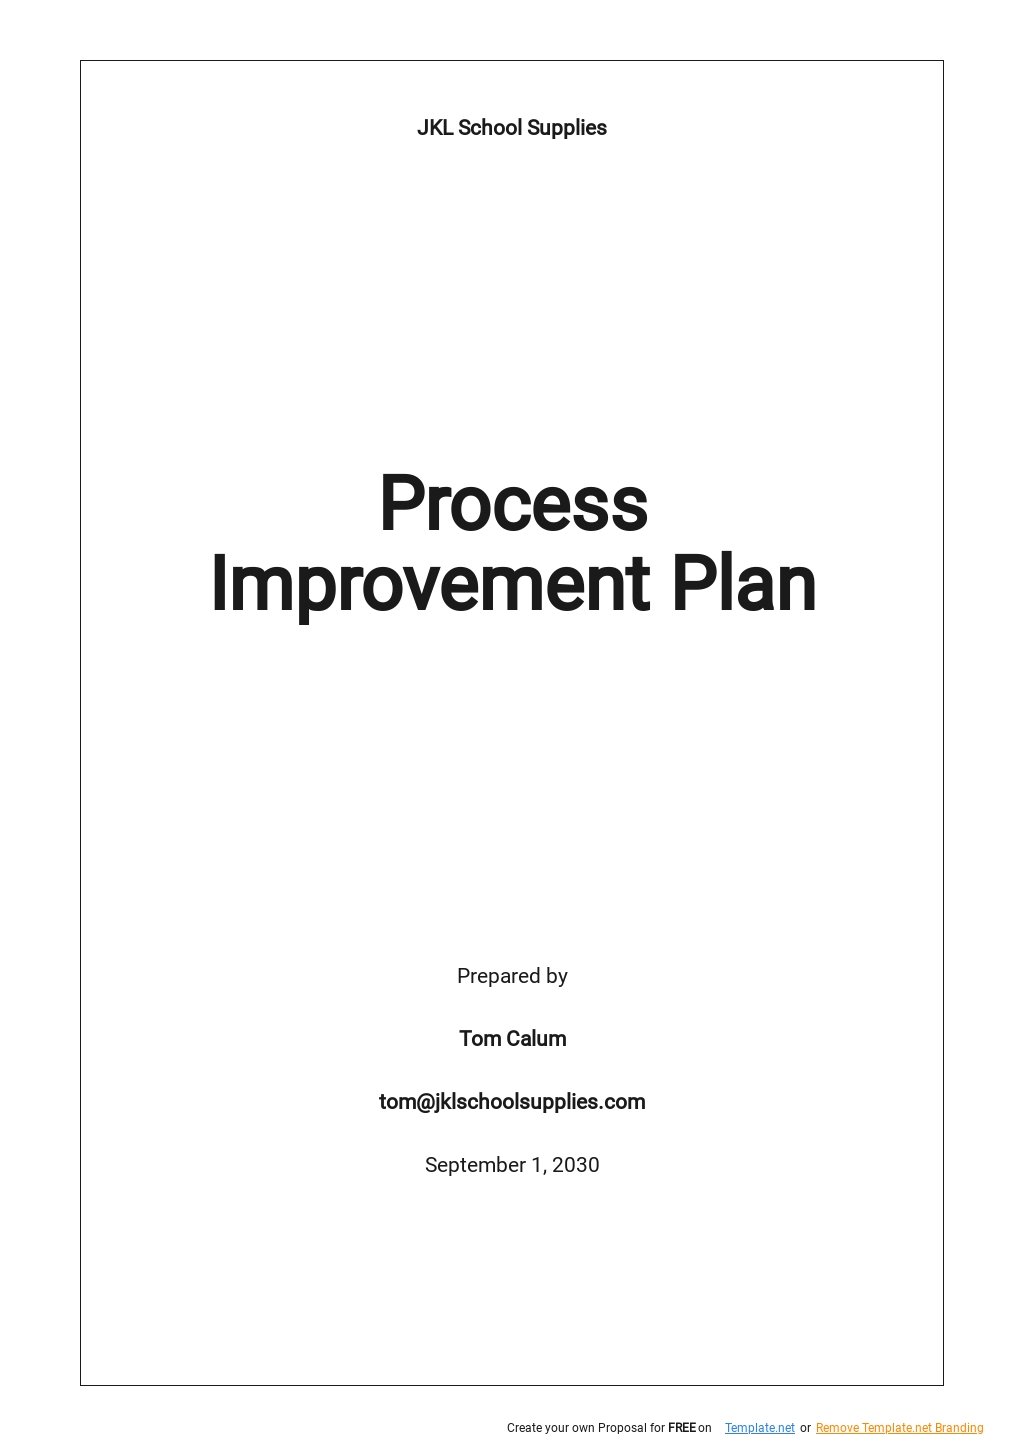 research articles on process improvement